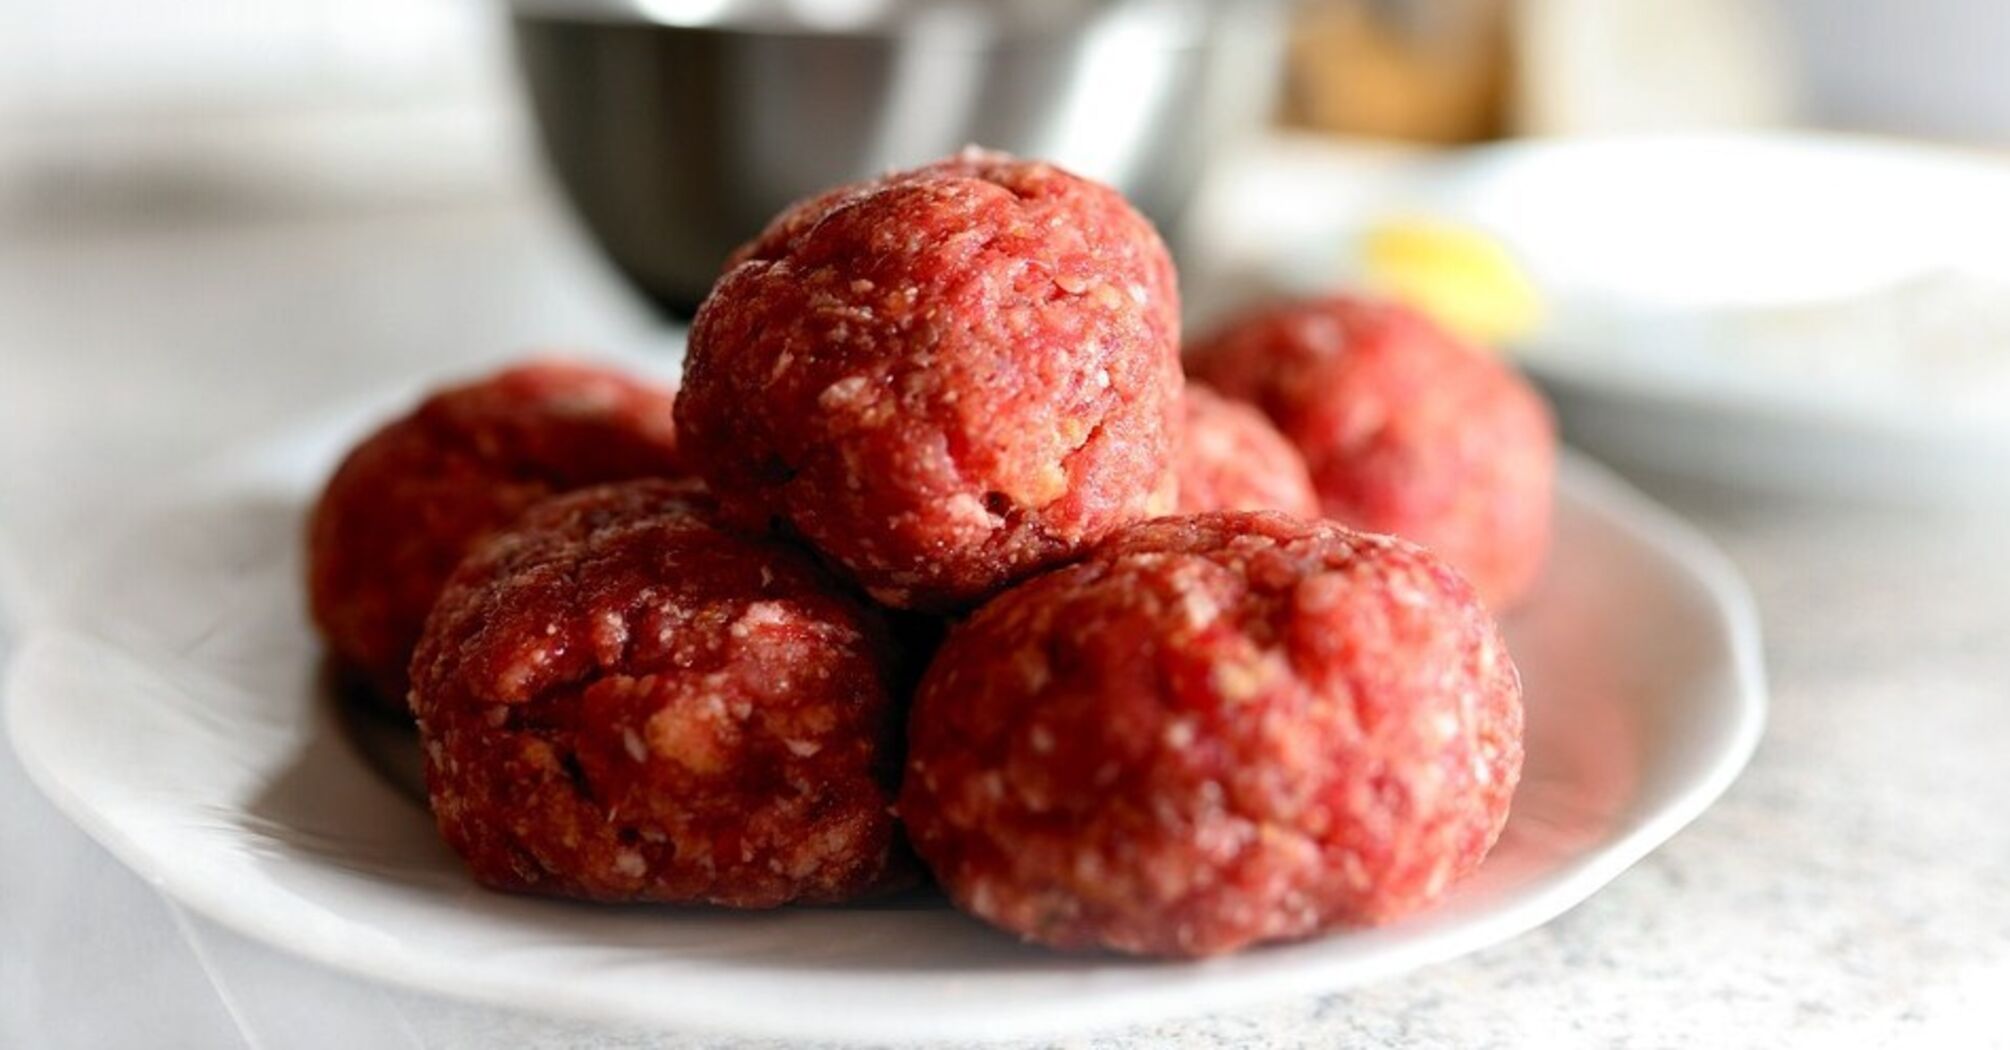 What other ingredients can be added to meatballs besides eggs so that they hold their shape well